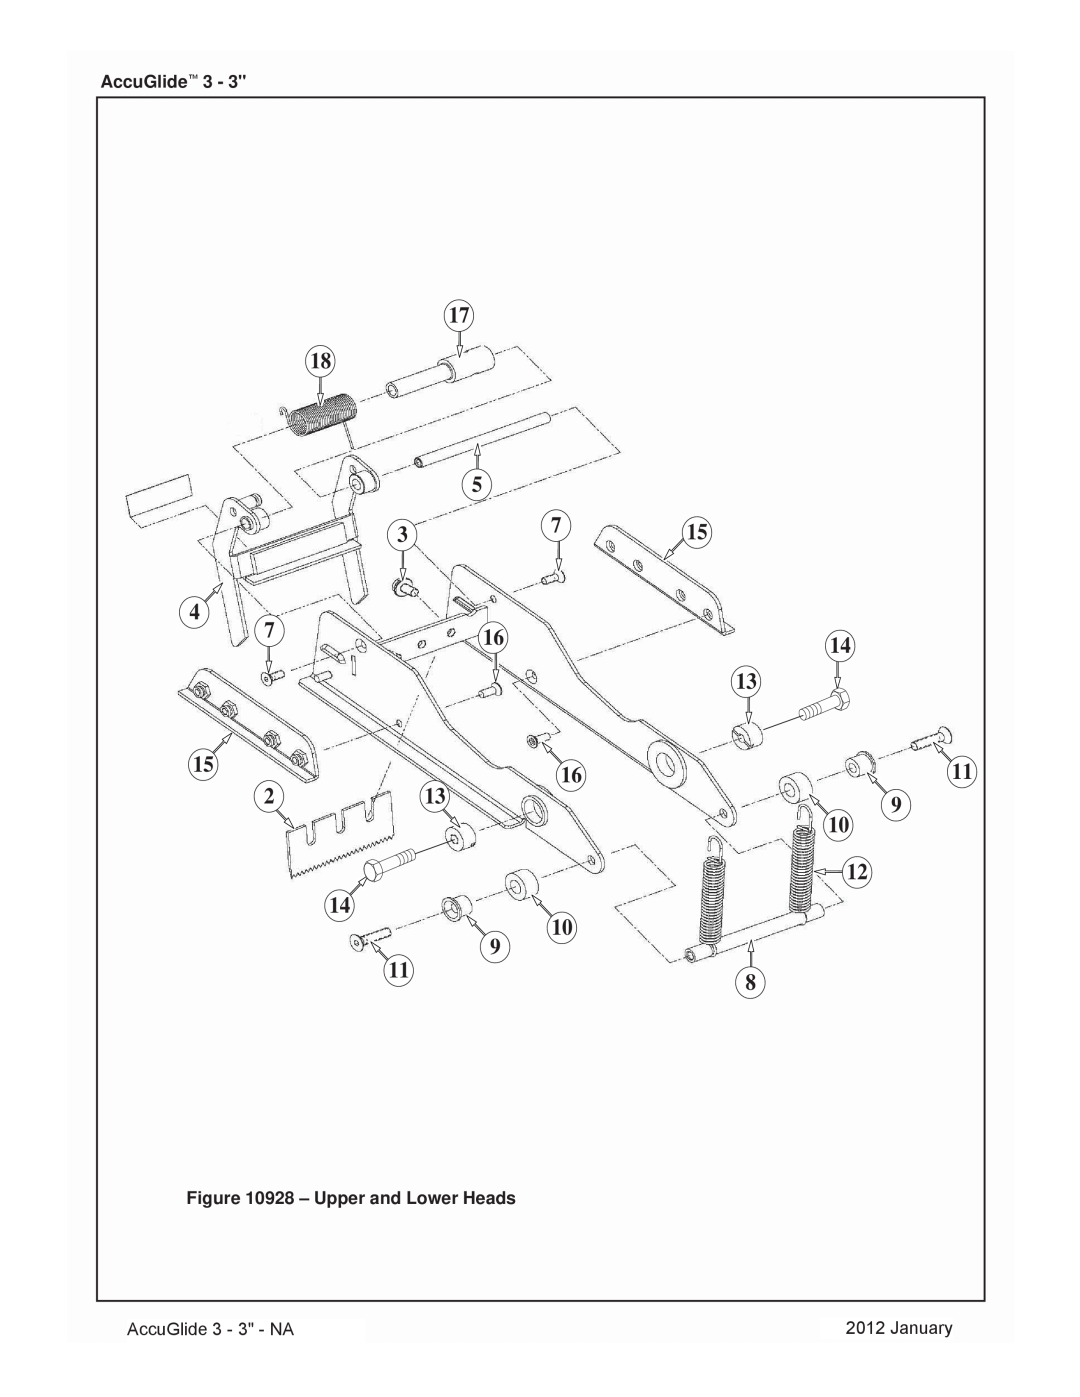 3M 40800 operating instructions 17 18 5 3715, 14 9, Upper and Lower Heads, AccuGlide 3 - 3 - NA, January 